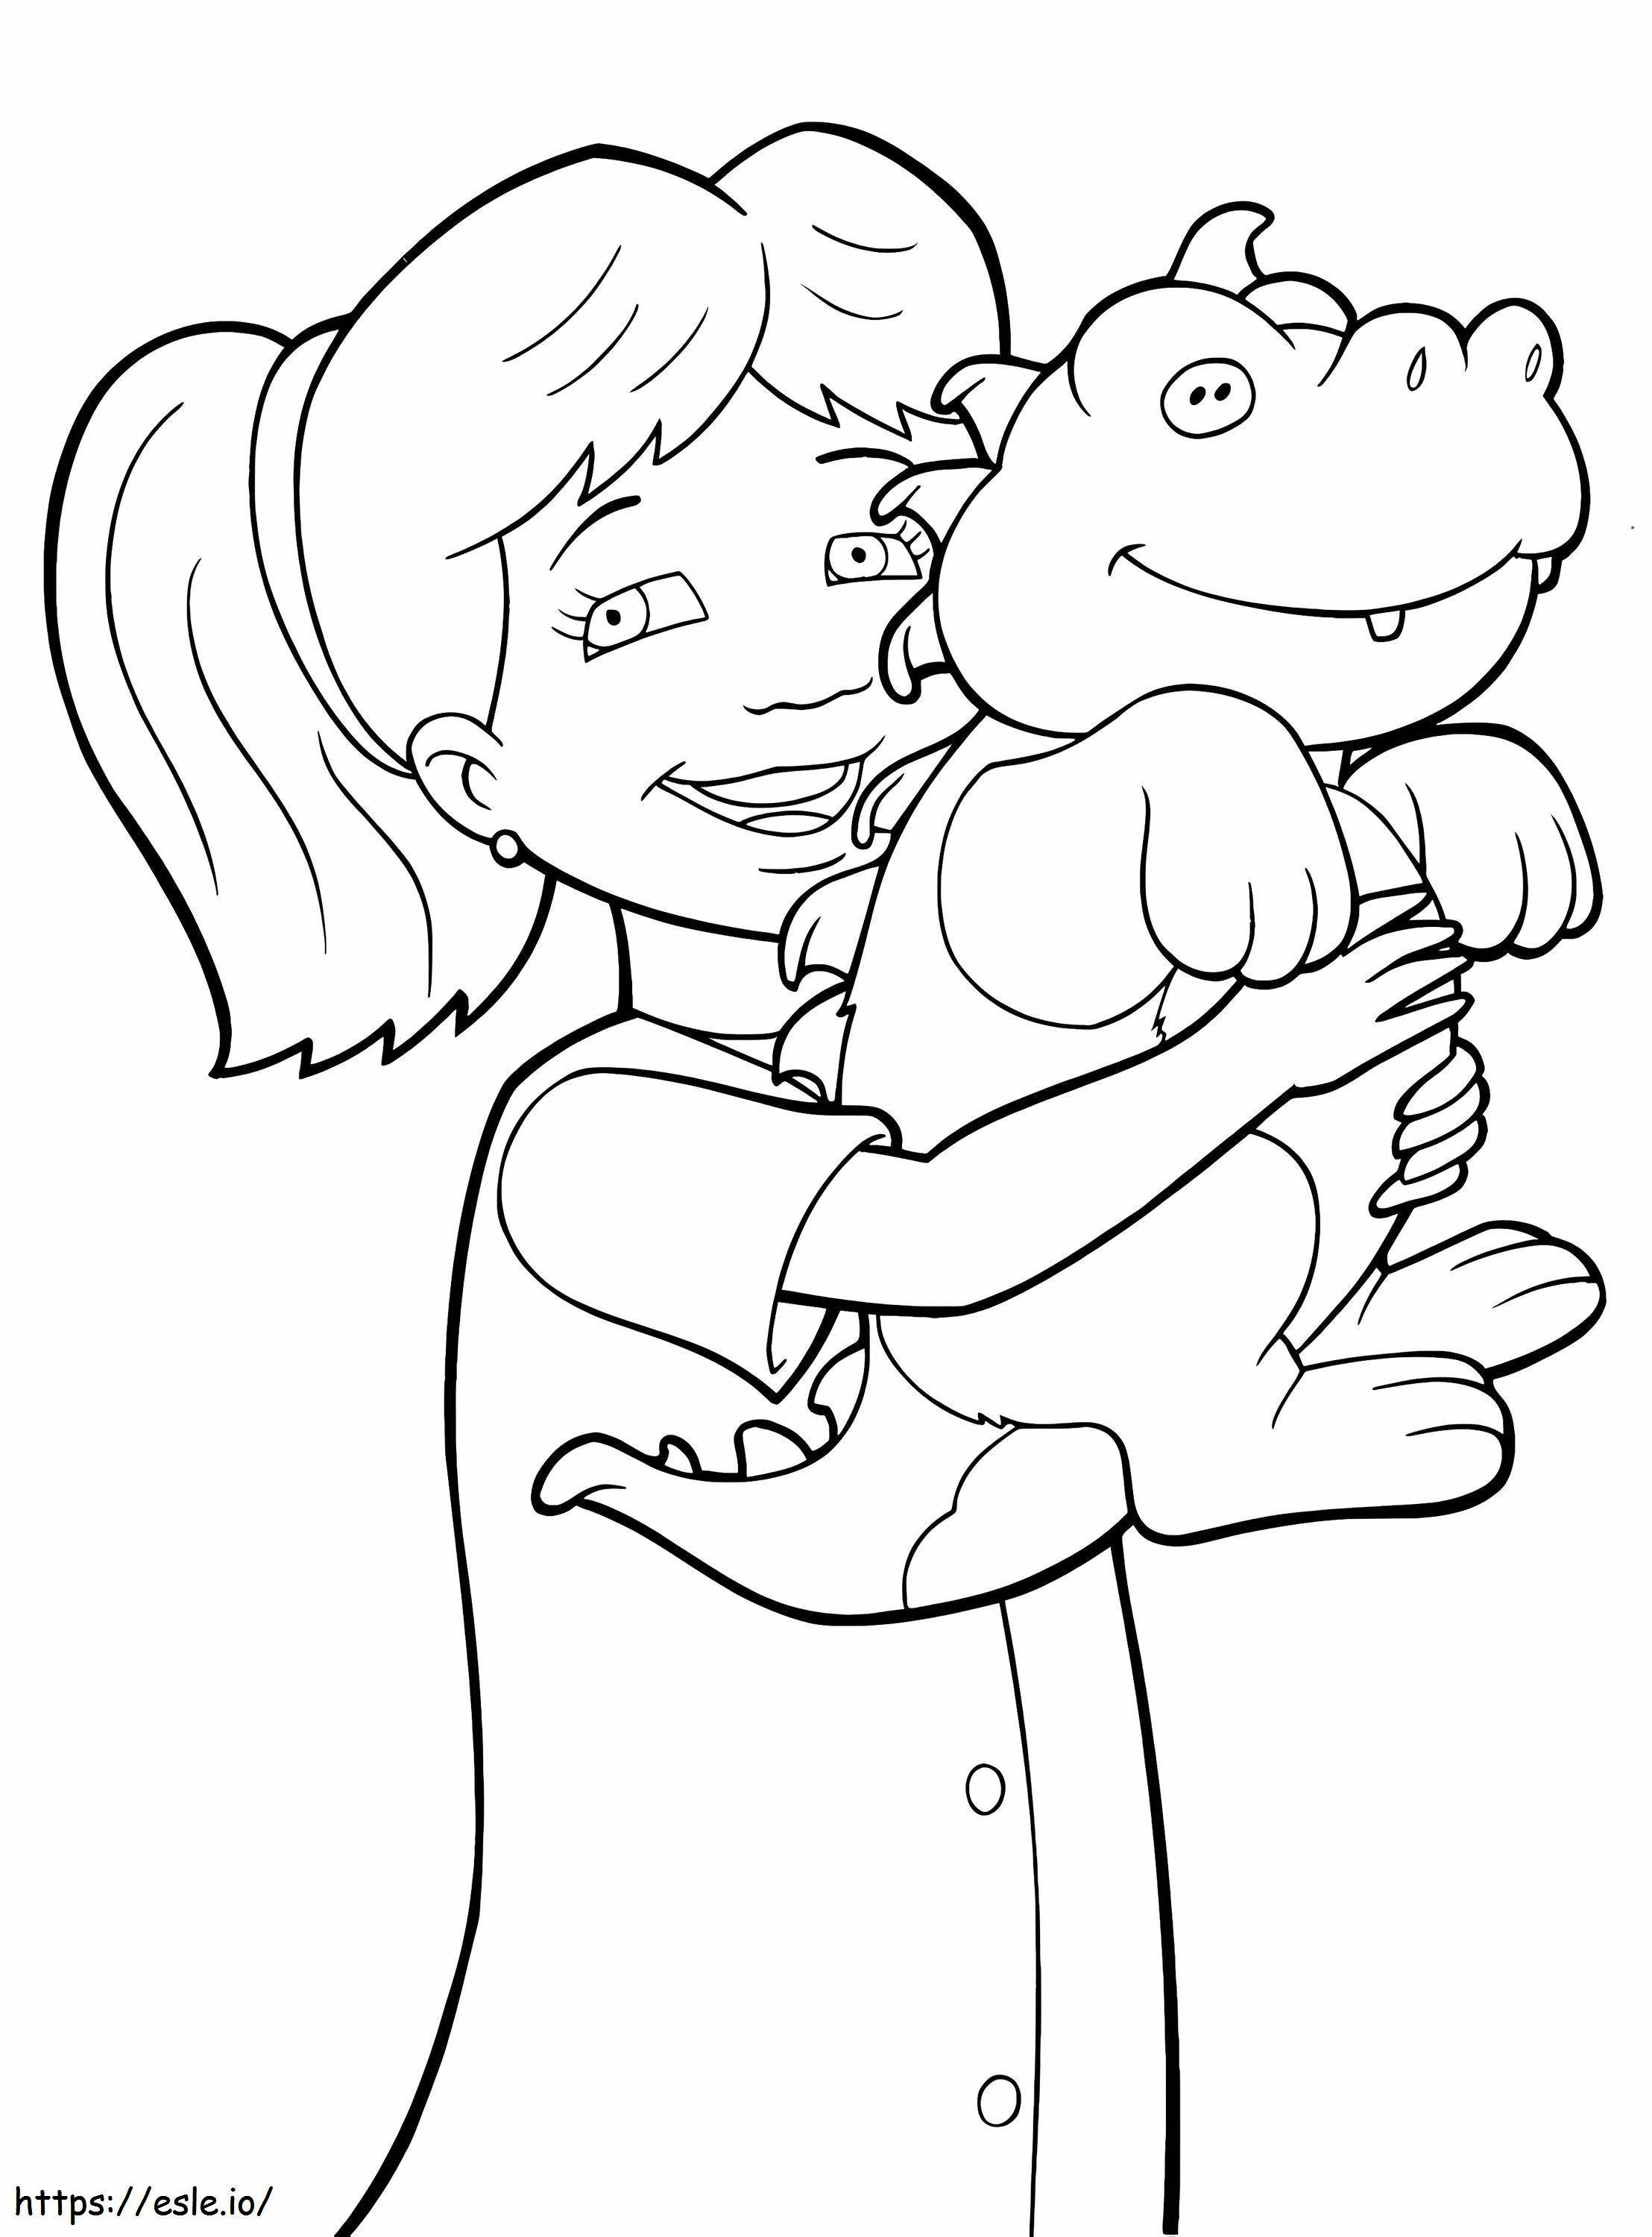 Emmy With Toy Dragon coloring page